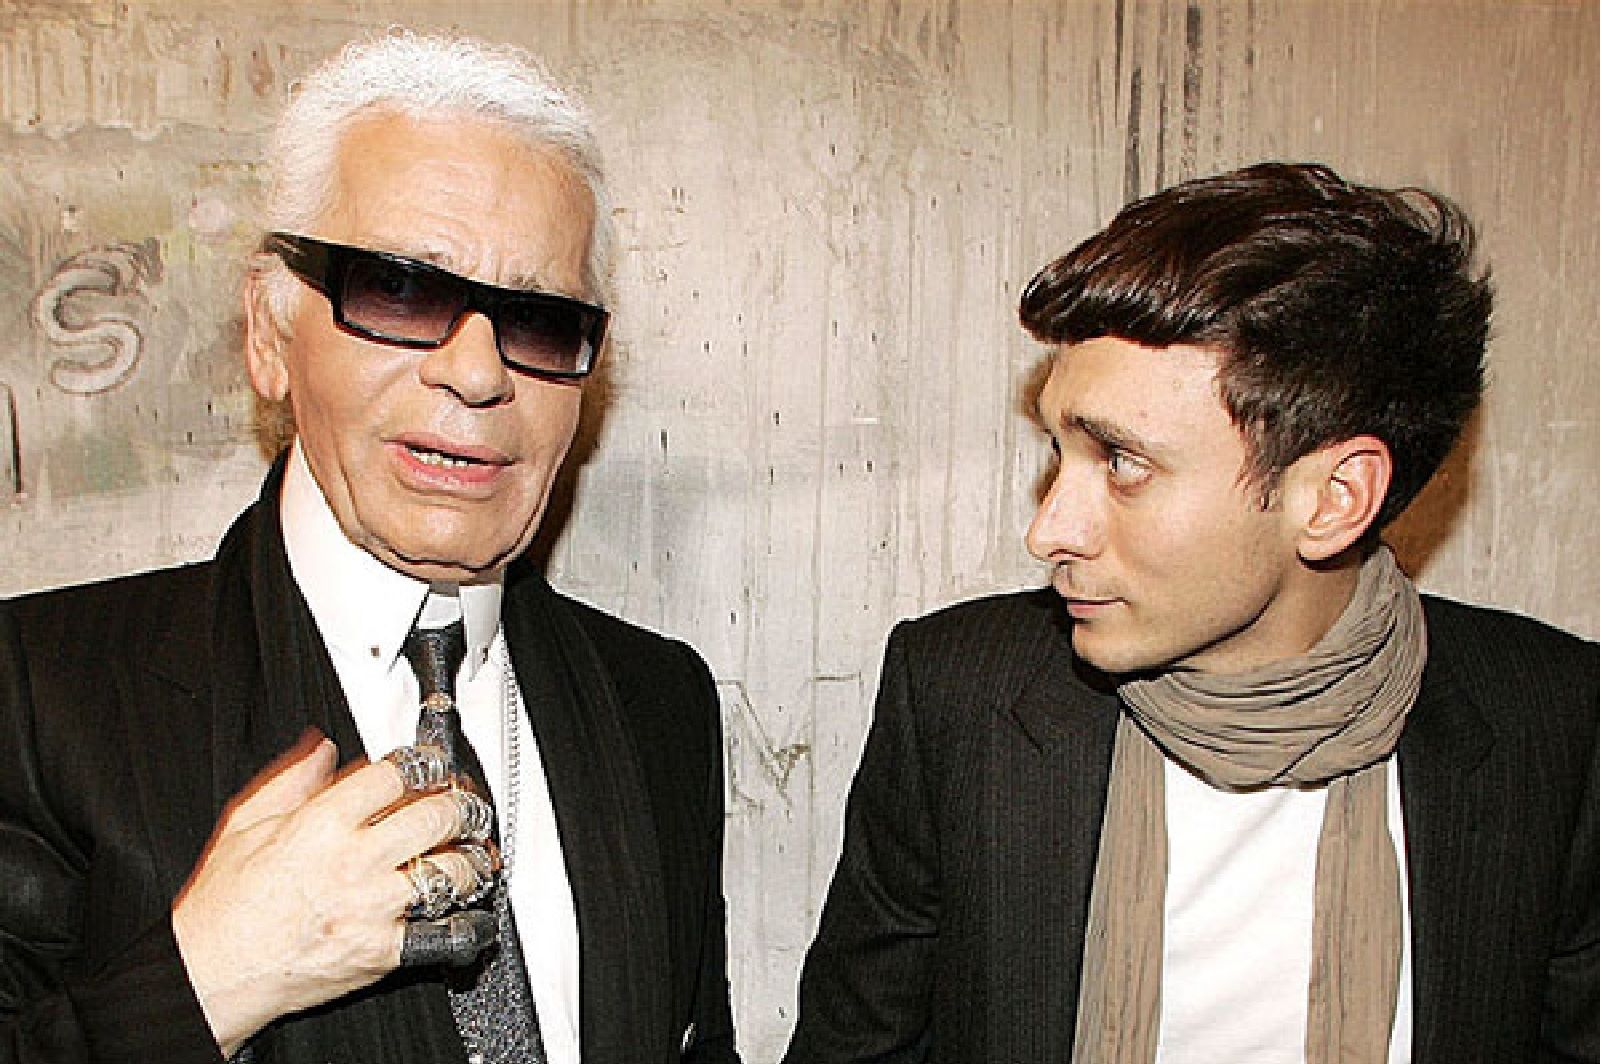 Hedi Slimane will not be creative director for a Chanel men's